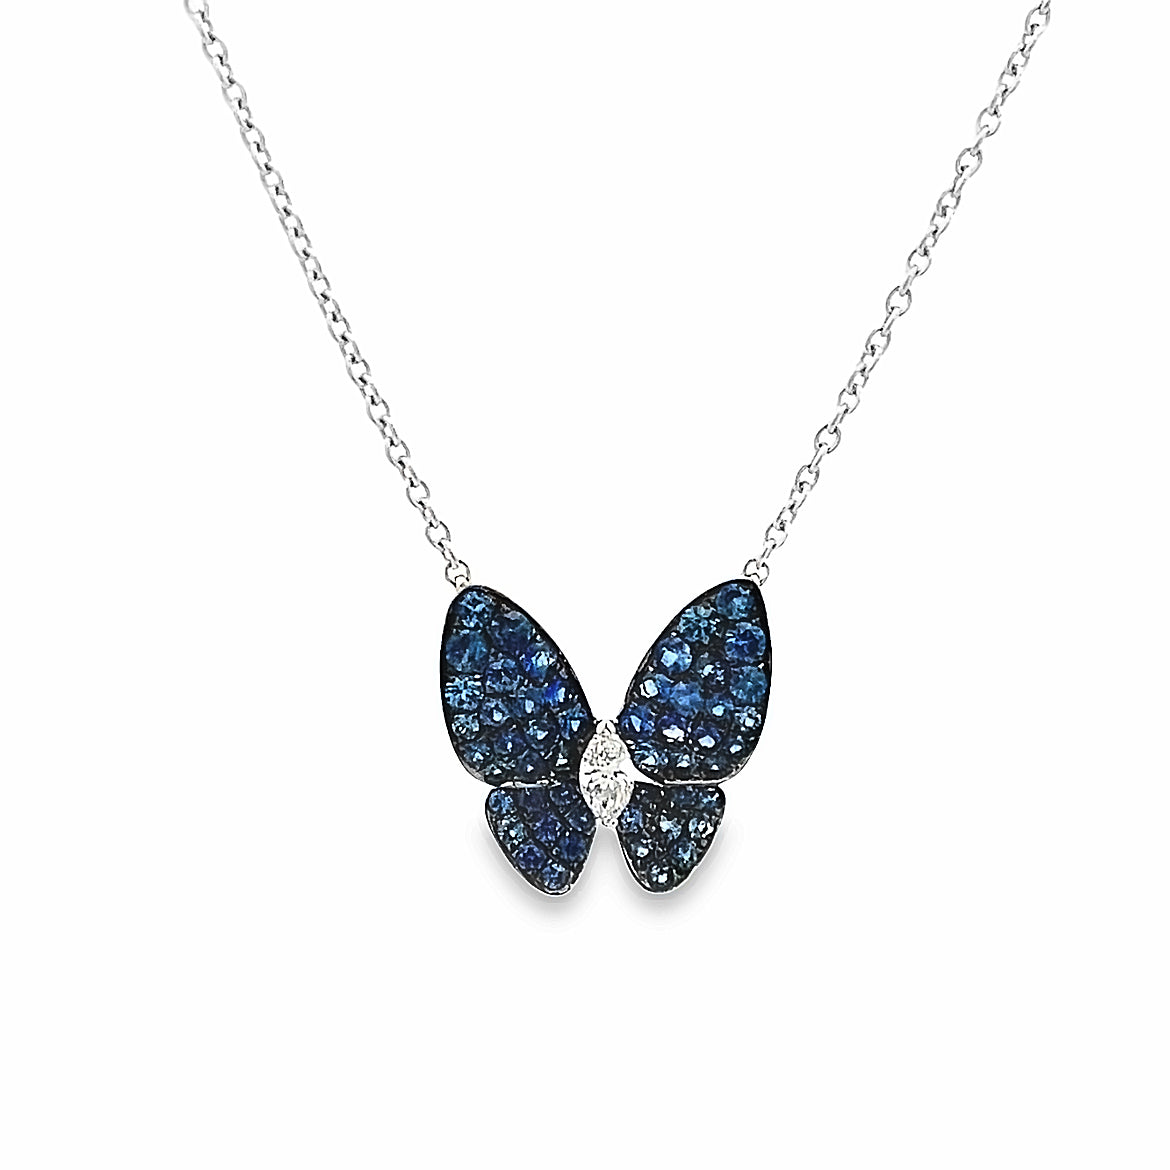 18K WHITE GOLD BUTTERFLY NECKLACE WITH BLUE SAPPHIRE